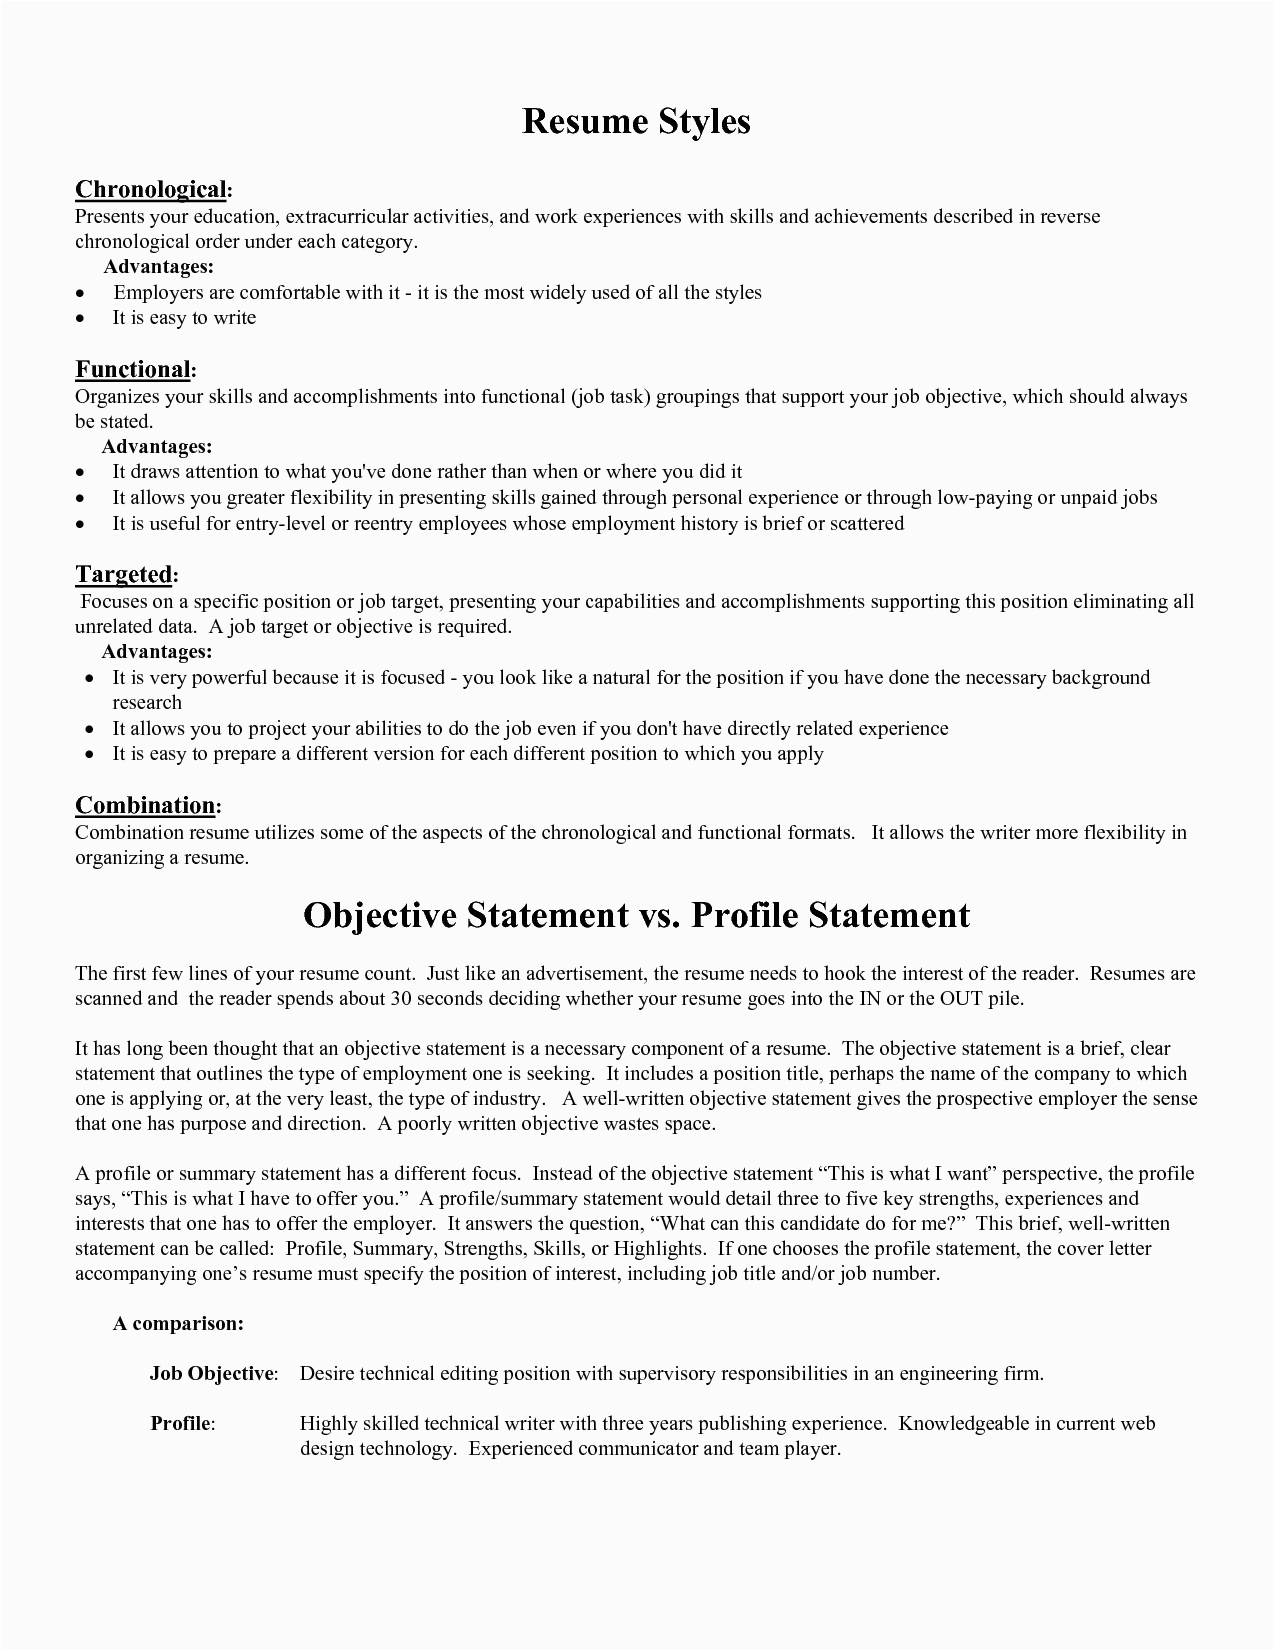 Sample Objective Statement for College Resume Resume Objective Statement